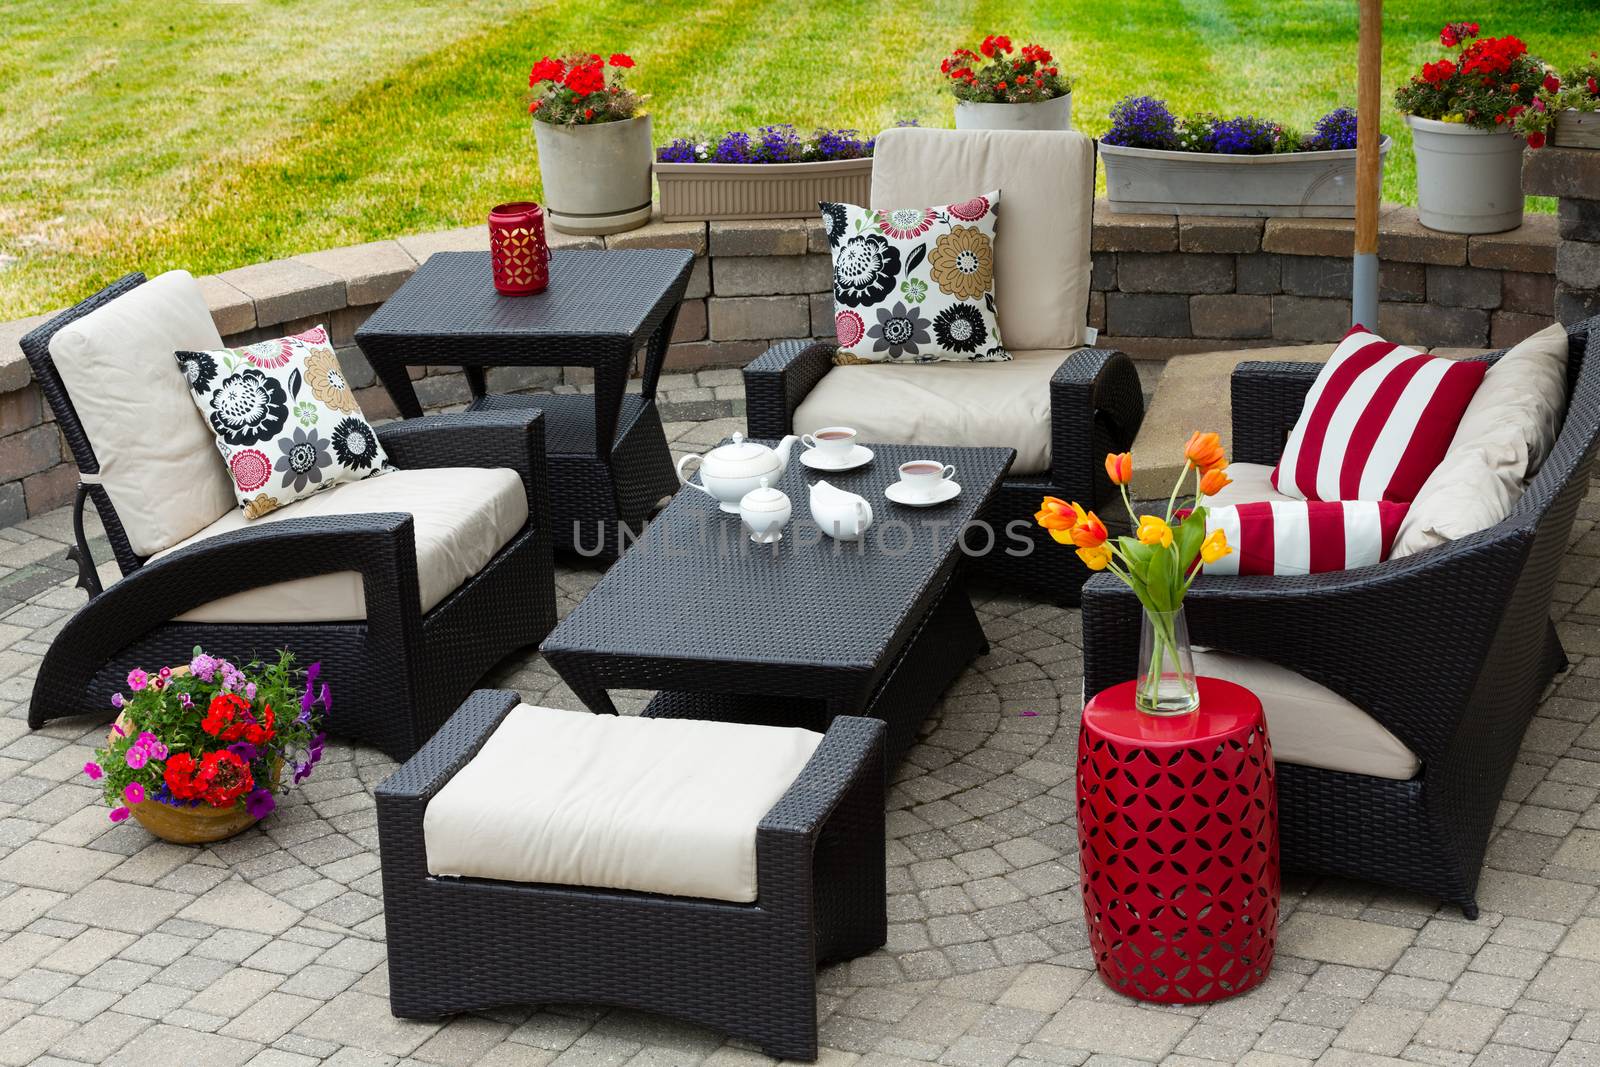 Overview of Upscale Patio Set, Dark Wicker Luxury Furniture with Comfortable Cushions on Outdoor Stone Patio of Affluent Home